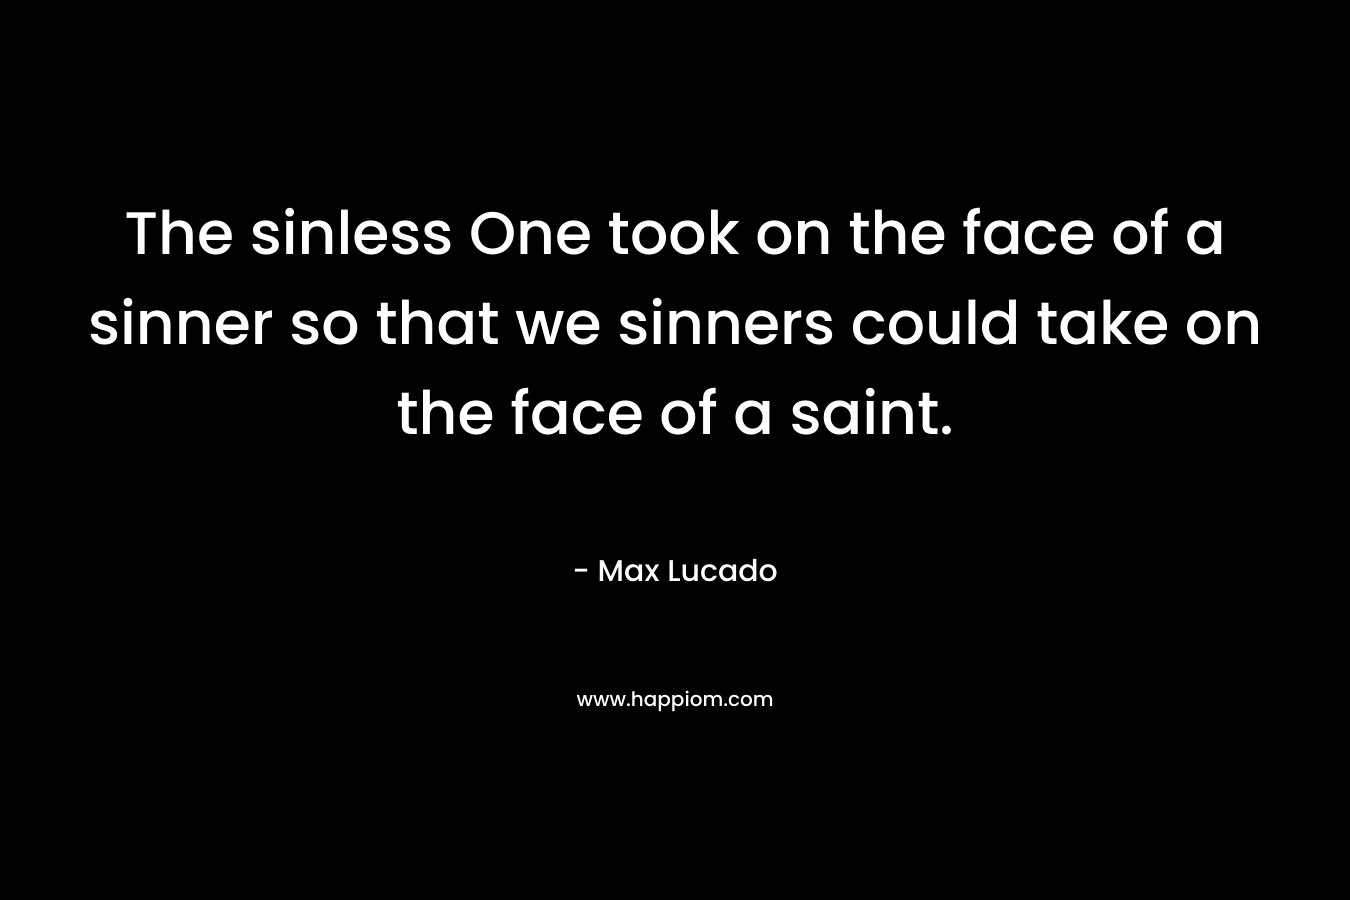 The sinless One took on the face of a sinner so that we sinners could take on the face of a saint. – Max Lucado